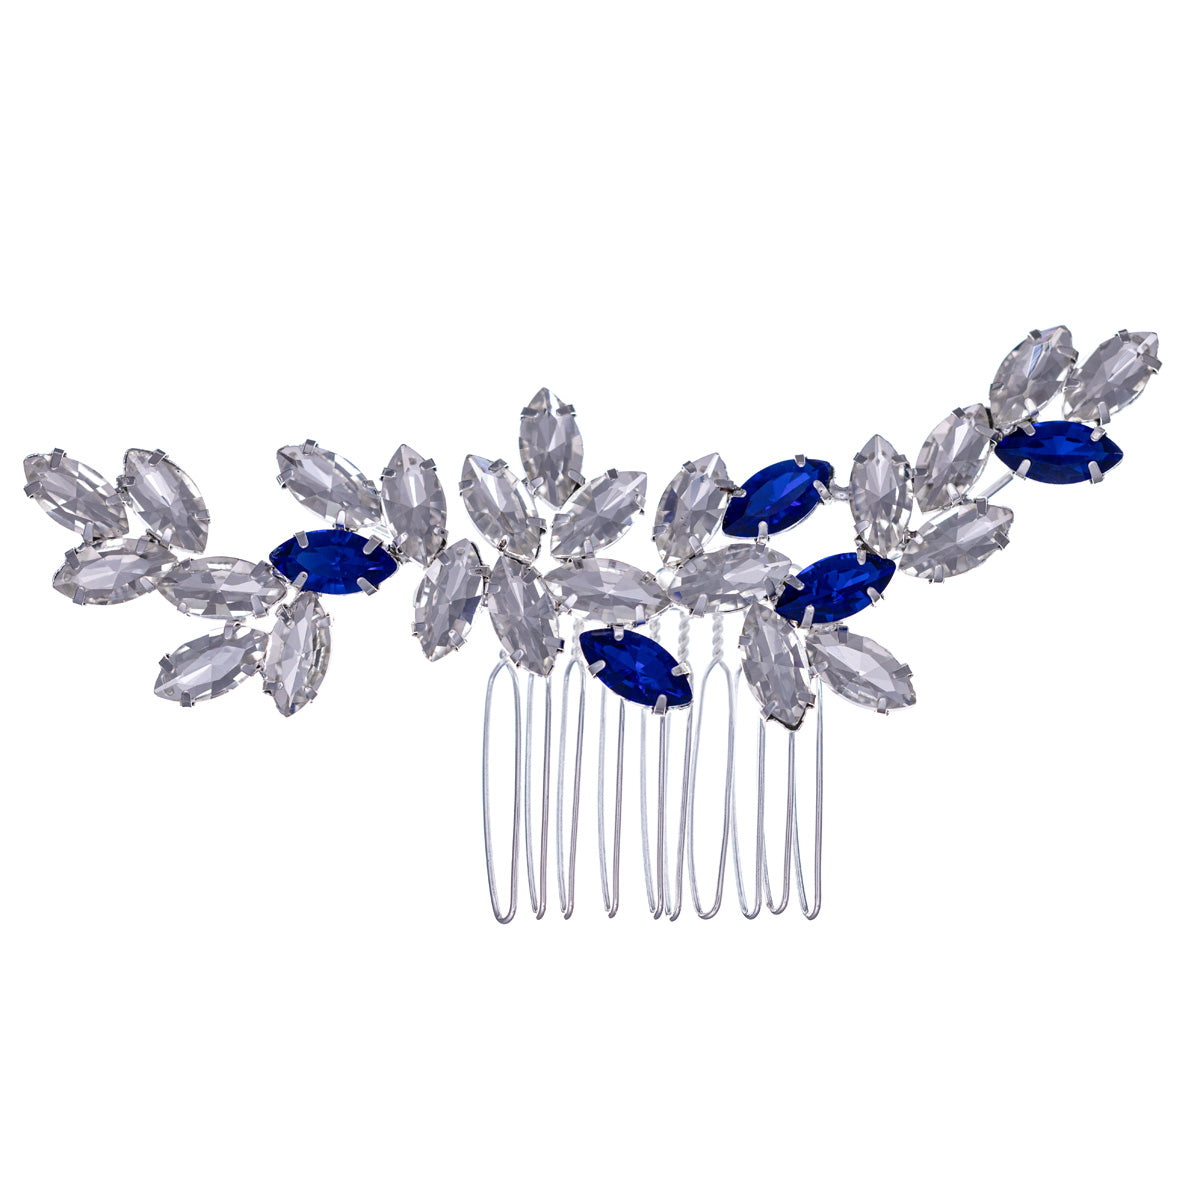 Exquisite headband for combing hair with a comb